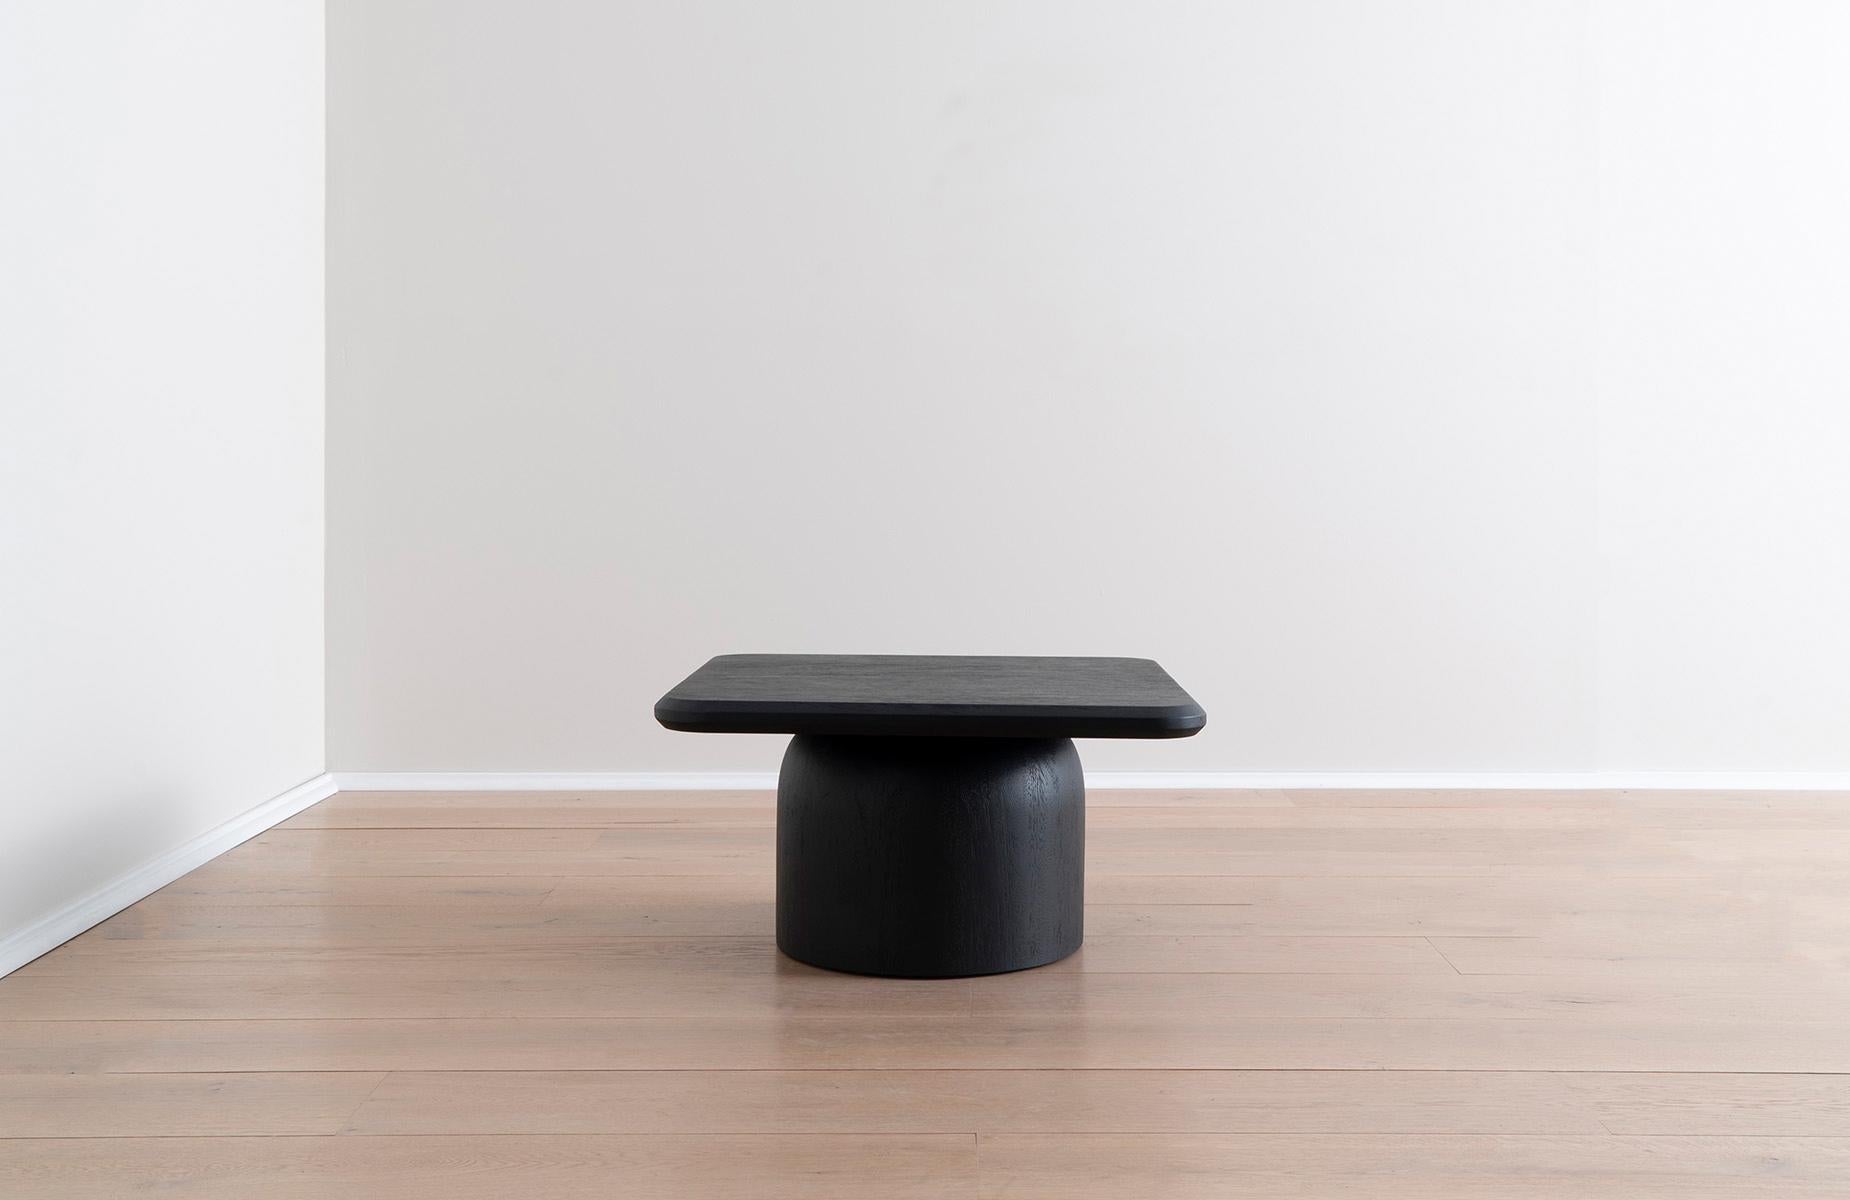 This black square coffee table is crafted from responsibly sourced conacaste wood and draws inspiration from Spanish architecture found within Antigua, Guatemala. By reimagining architectural elements found in the city — sloping rooftops, domes, and